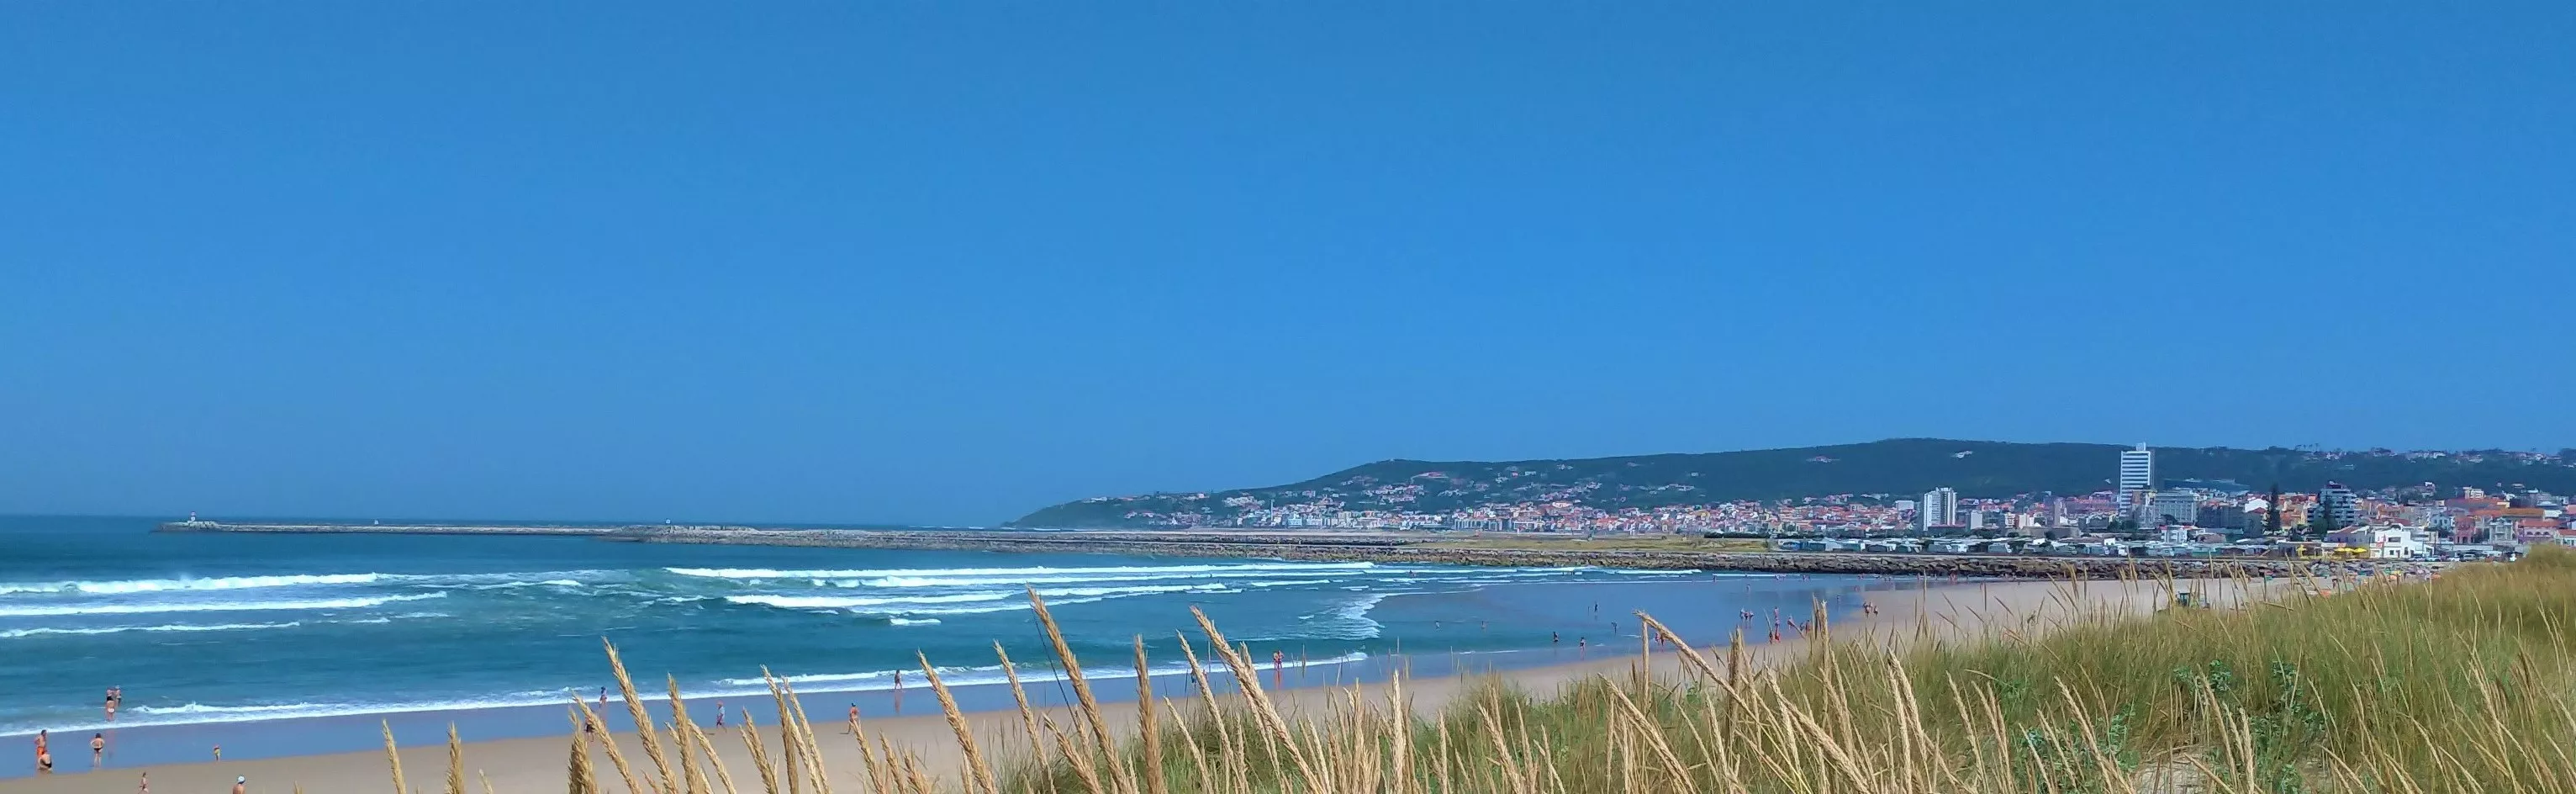 Cabedelo Beach in Portugal, Europe | Surfing,Beaches - Rated 4